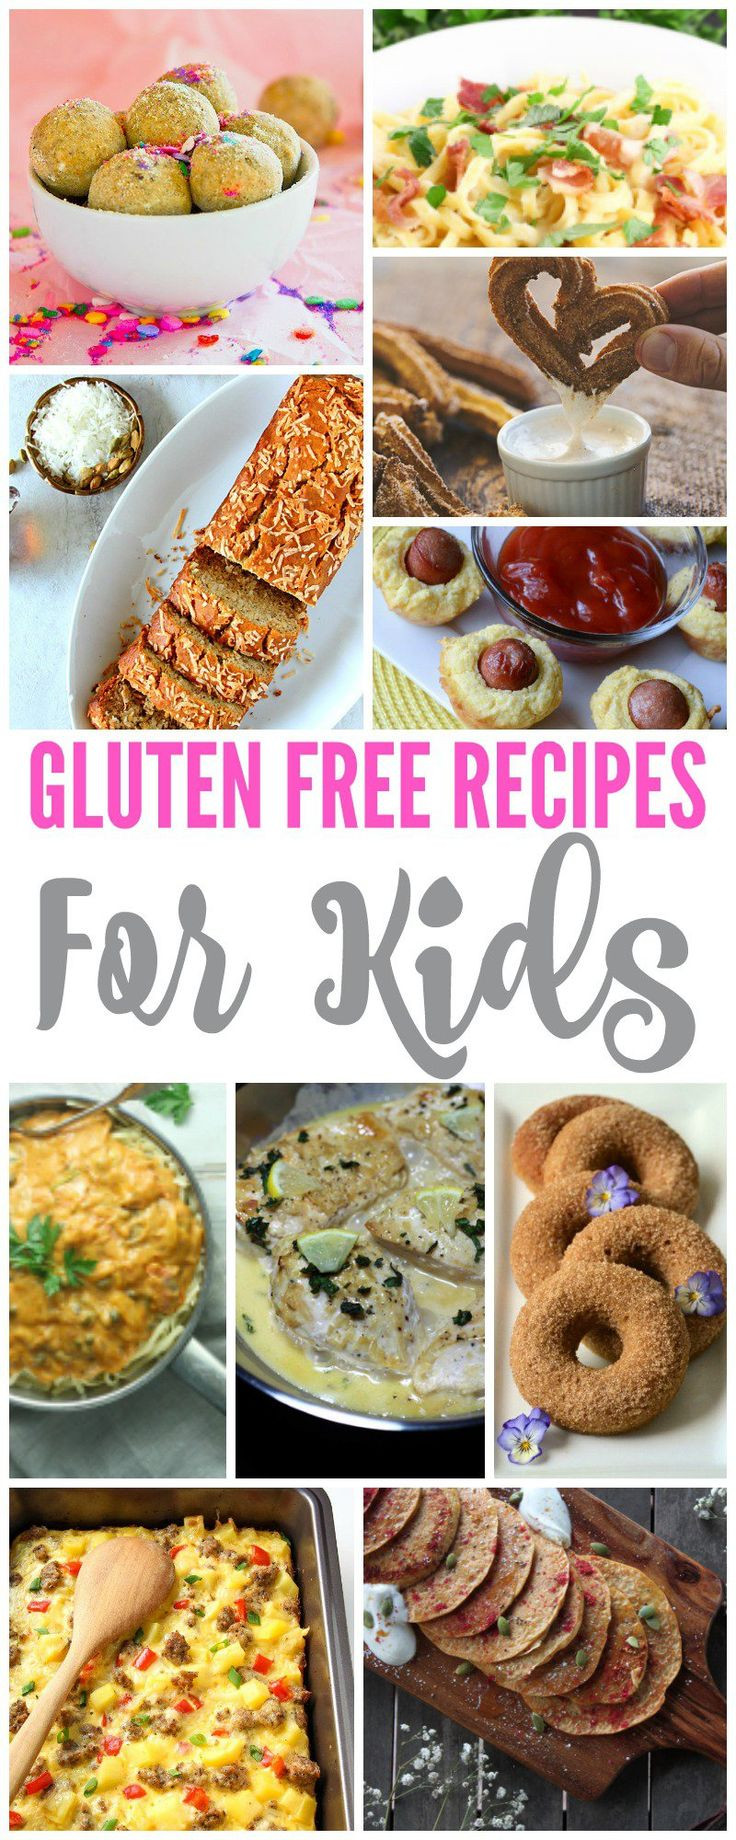 Kid Friendly Gluten Free Dairy Free Recipes
 1000 images about HEALTHY MEAL & SNACKS FOR KIDS on